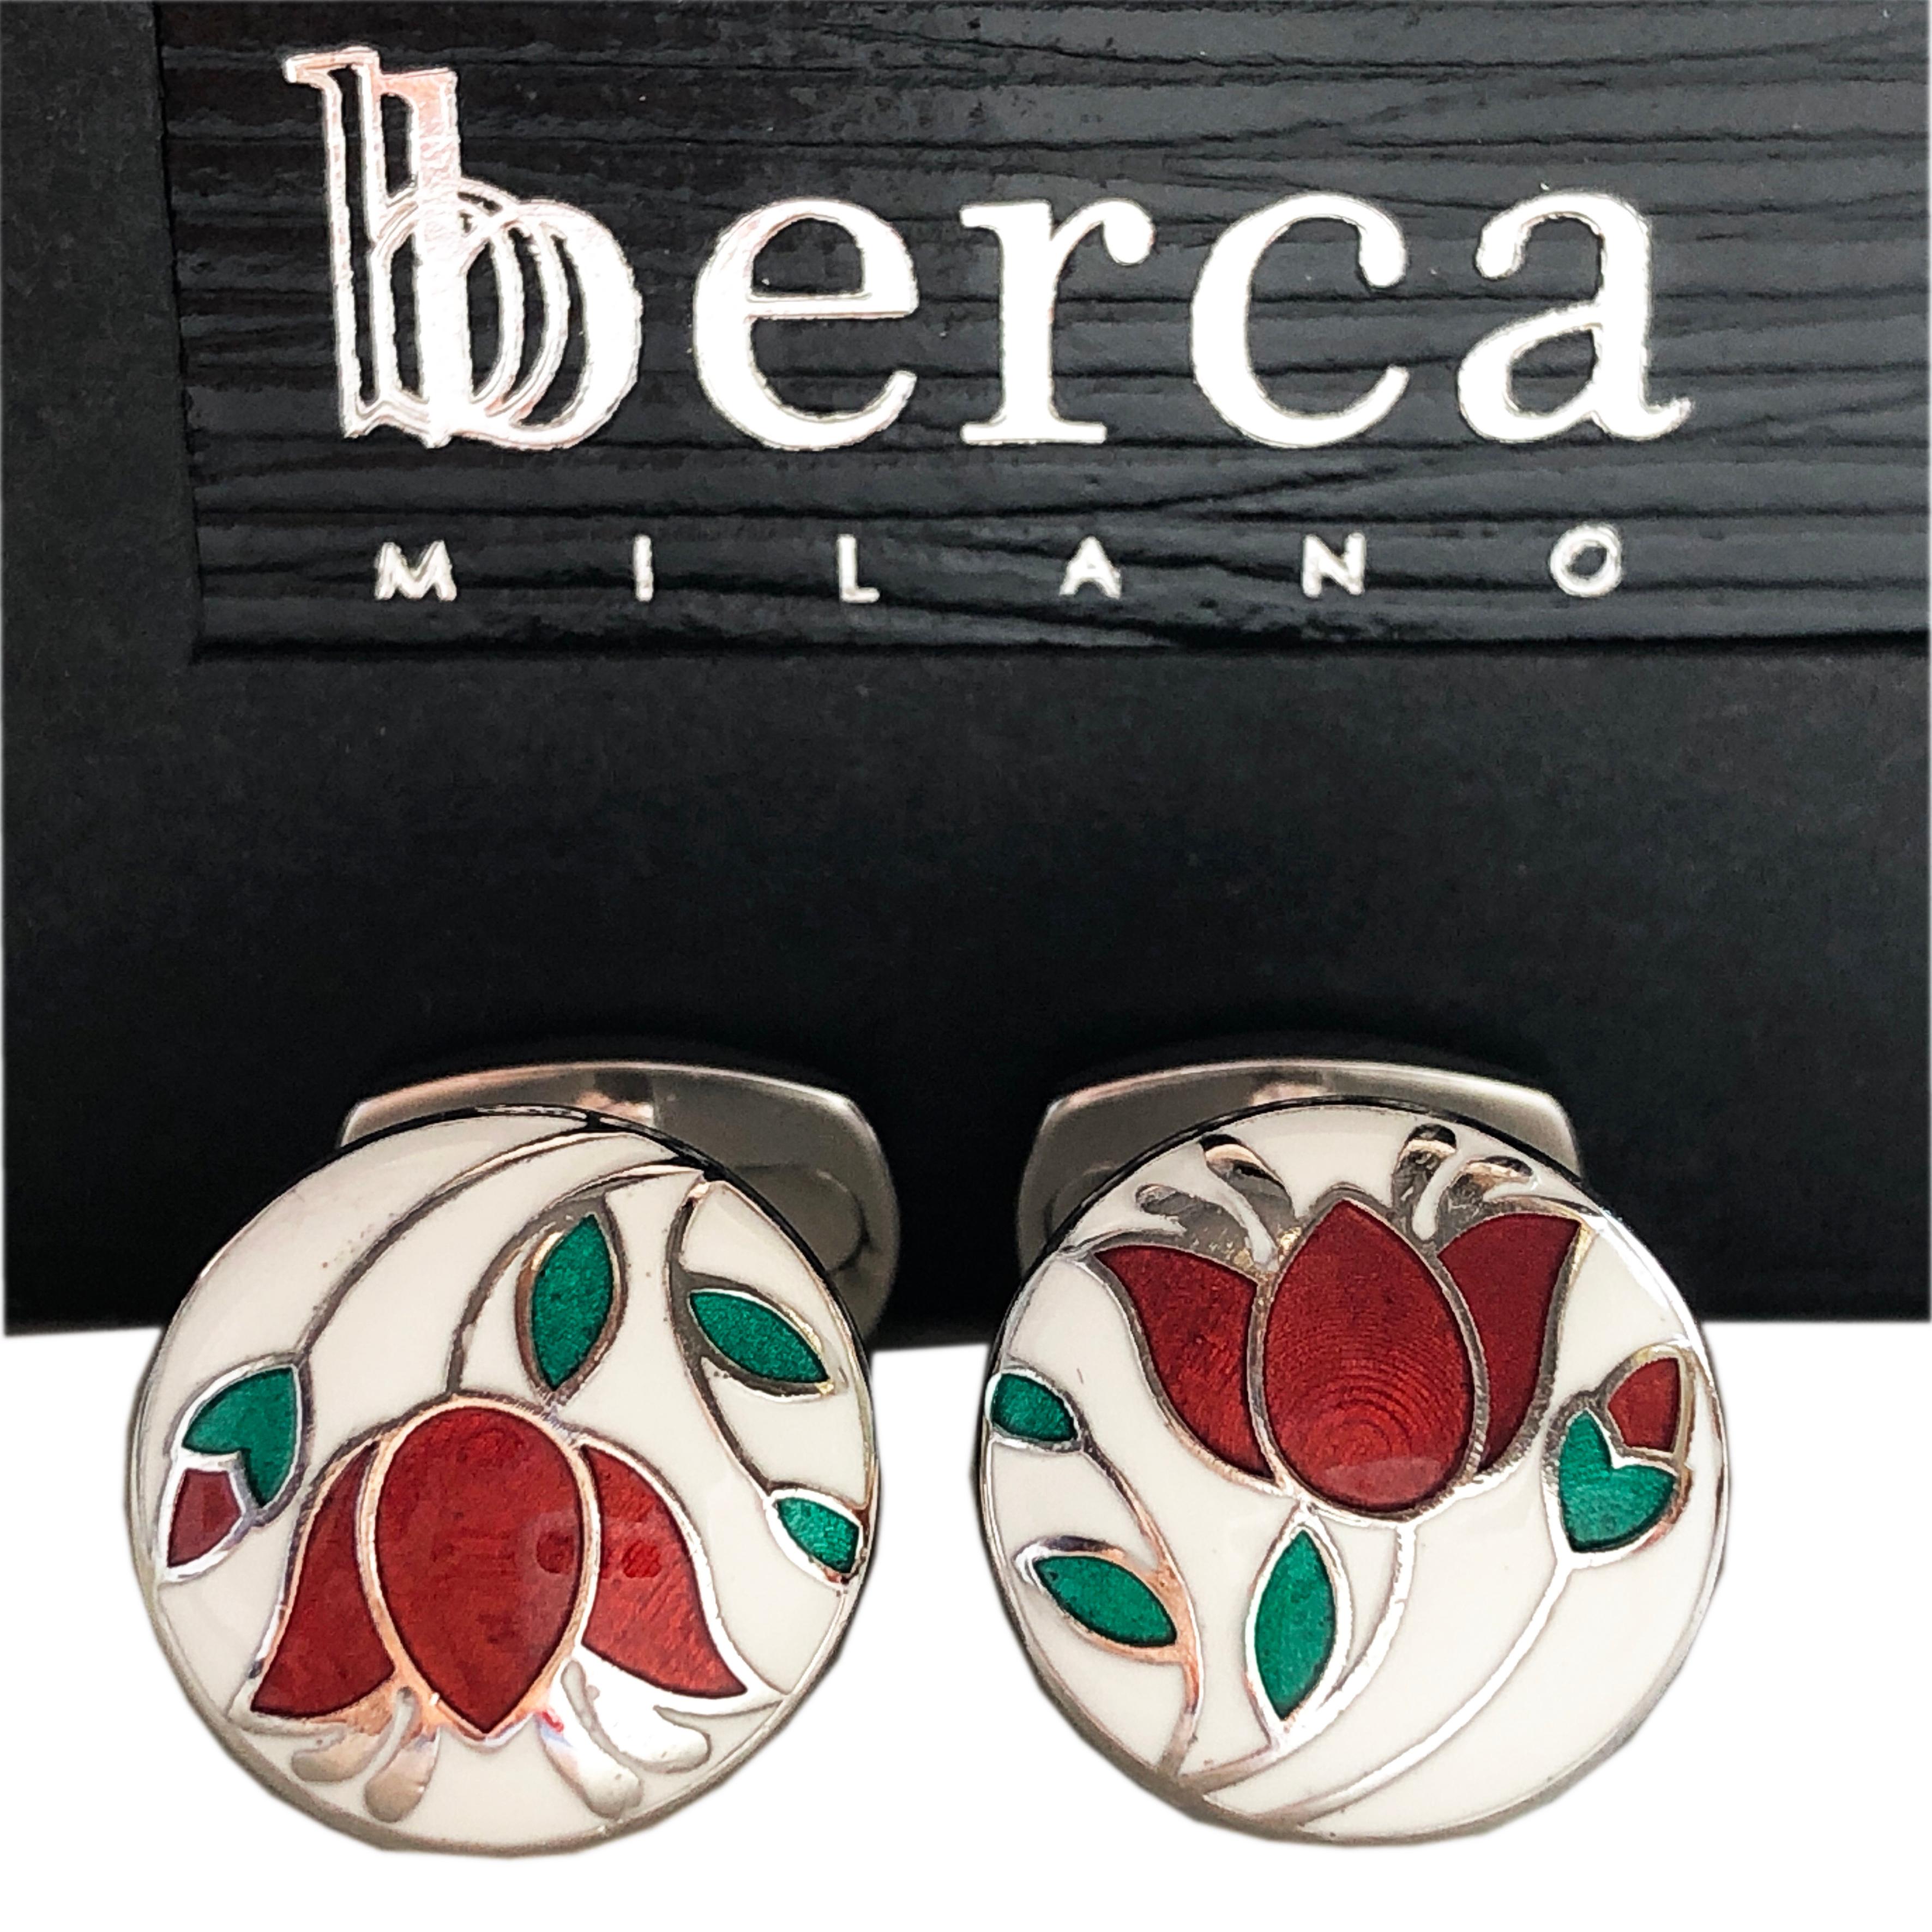 Chic, Unique yet Timeless Hand Enameled Red Flower, Green Leaves, in a Round White Setting Cabochon Sterling Silver Cufflinks, T-bar back.
In our Smart Black Box and Pouch.

Front Diameter about 0.596 inches.